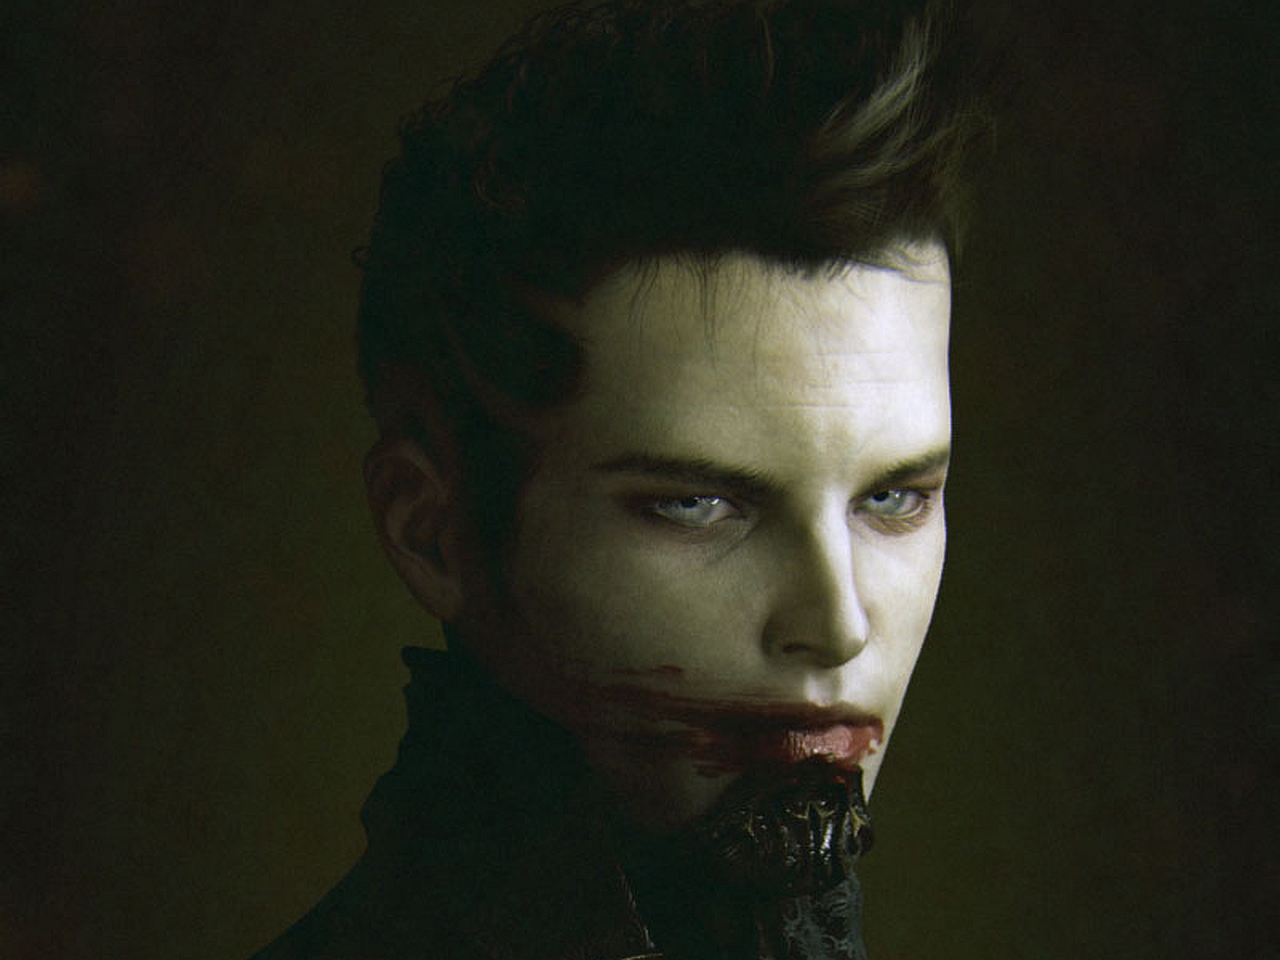 Male Vampire With Short Hair - HD Wallpaper 